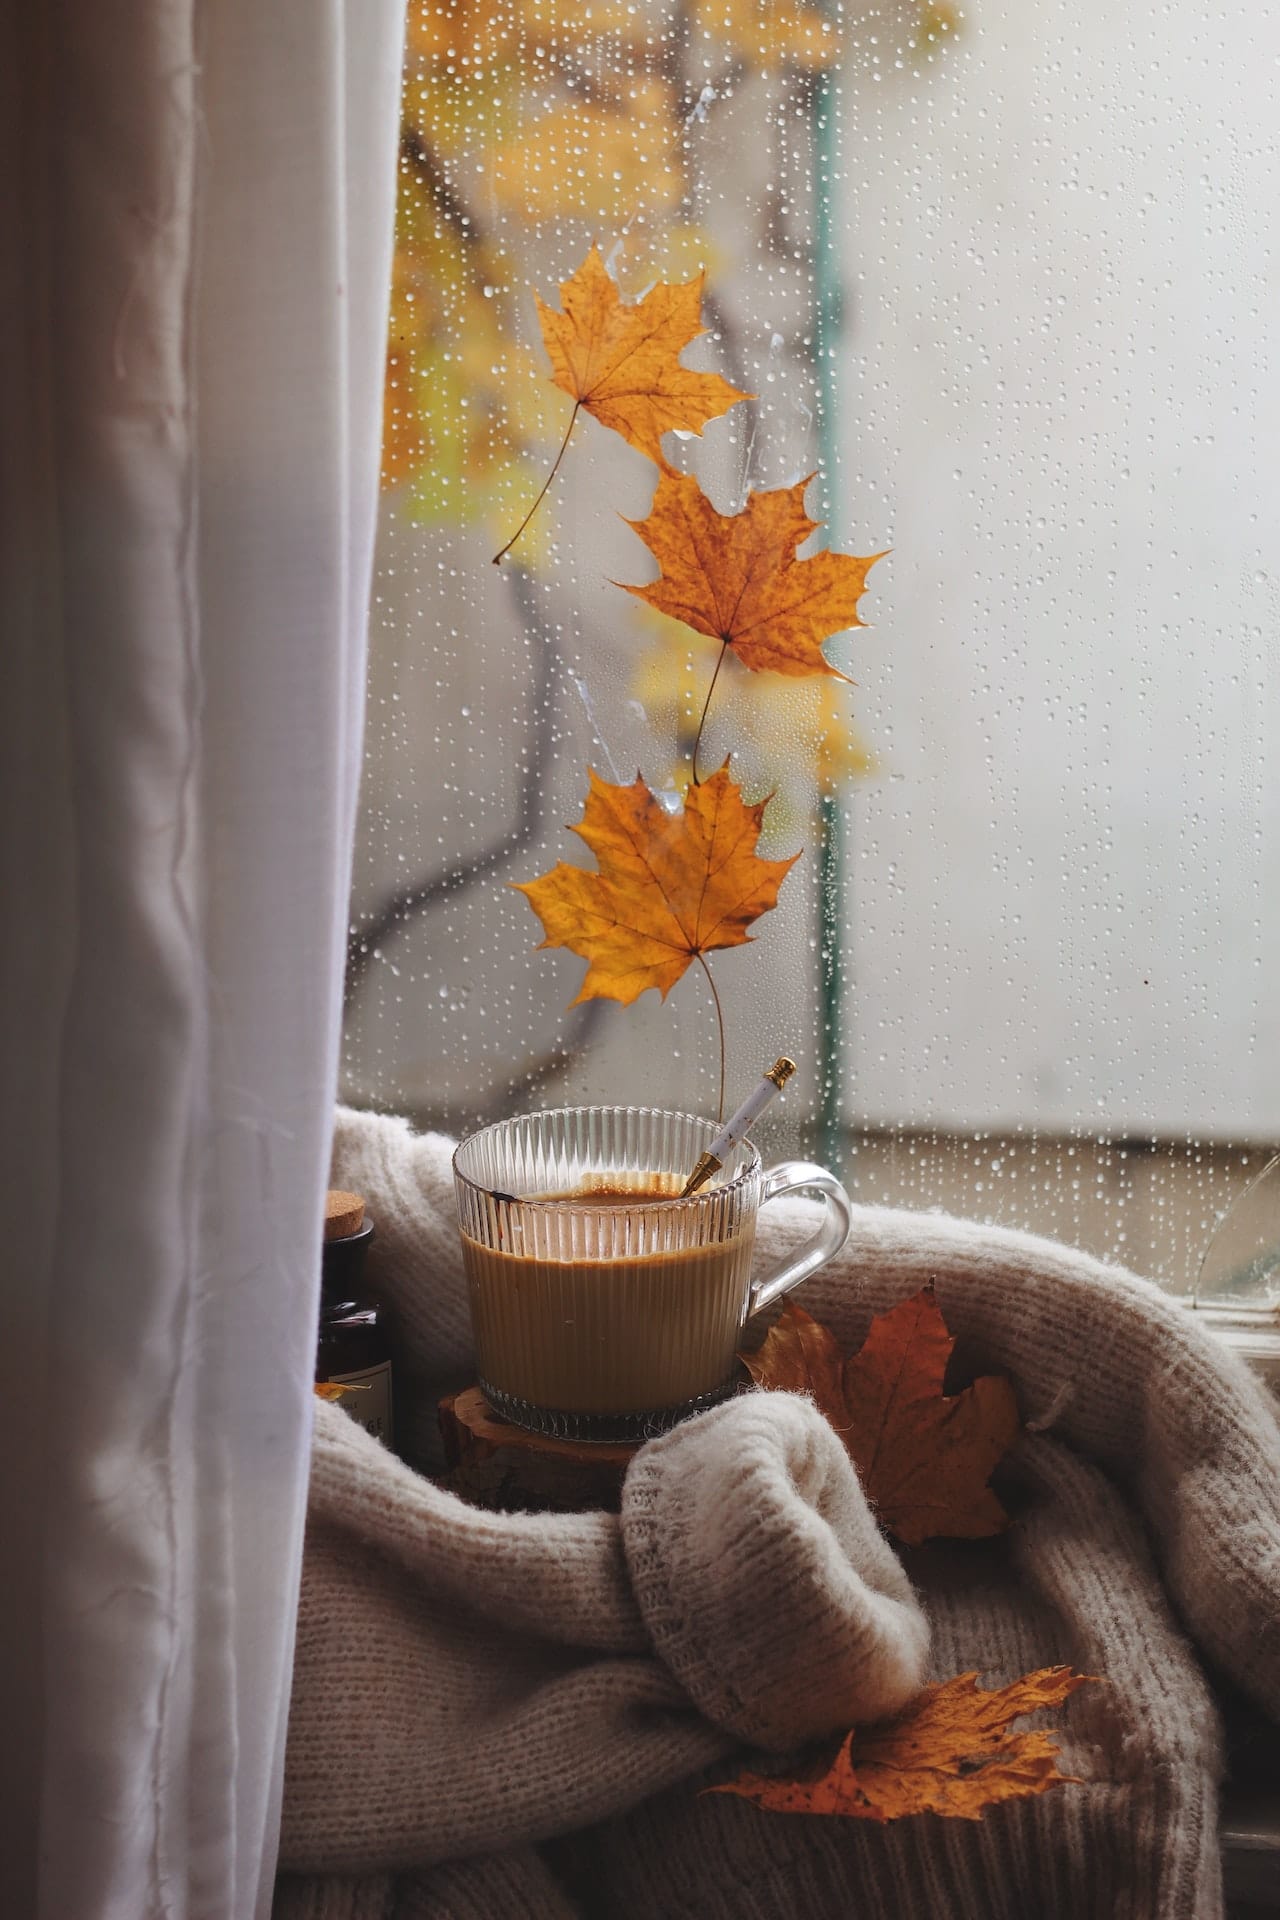 An autumn-styled window with golden maple leaves and a pumpkin latte in a glass mug.